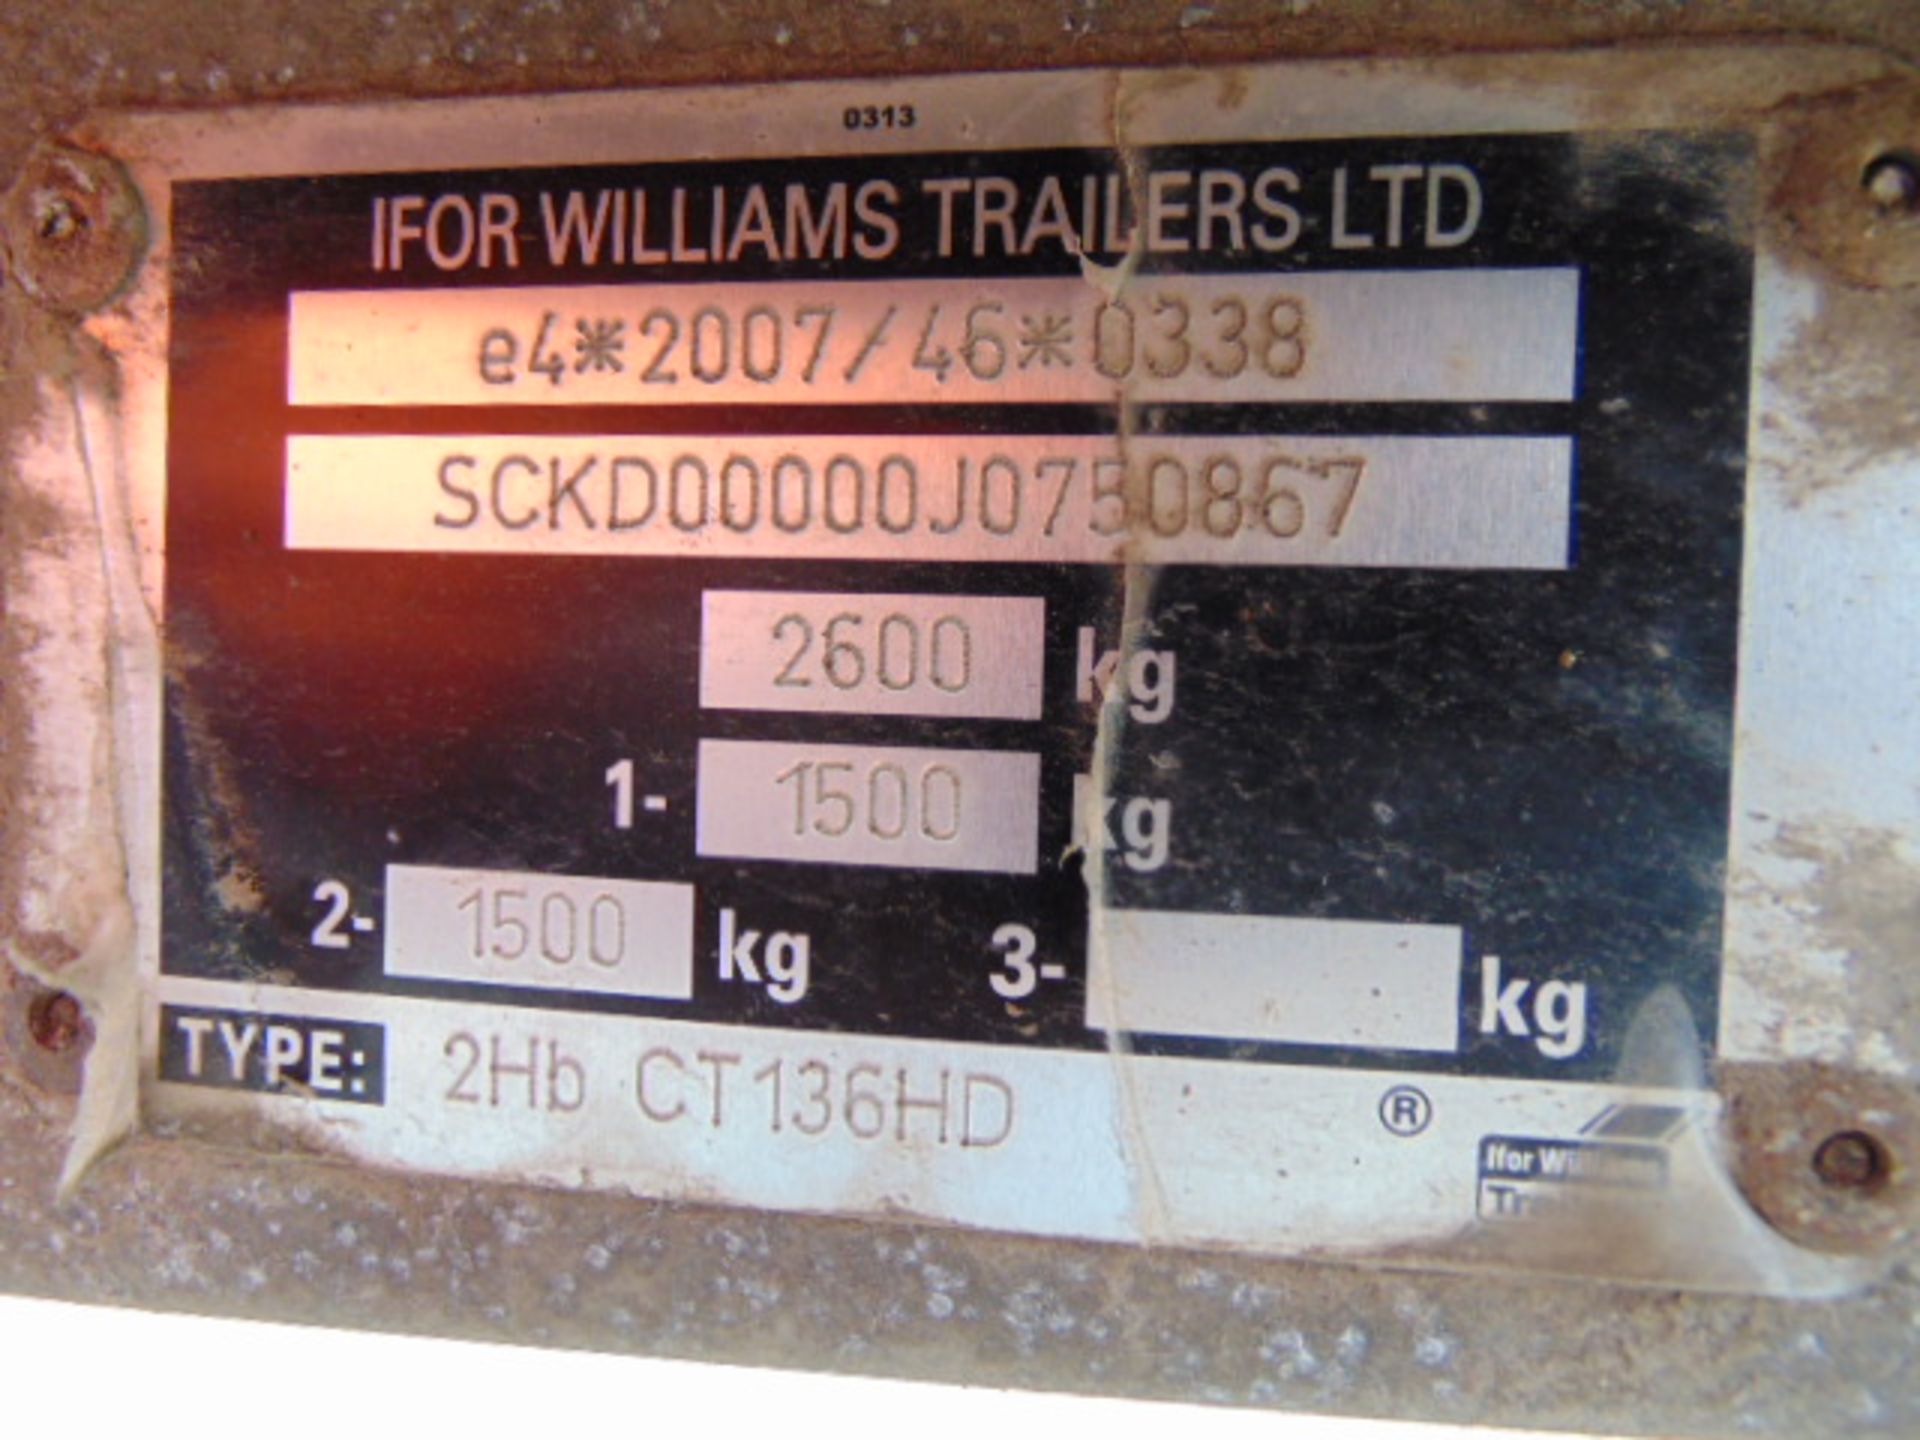 Ifor Williams Twin Axle Car Transporter Trailer c/w Pull Out Ramps - Image 16 of 16